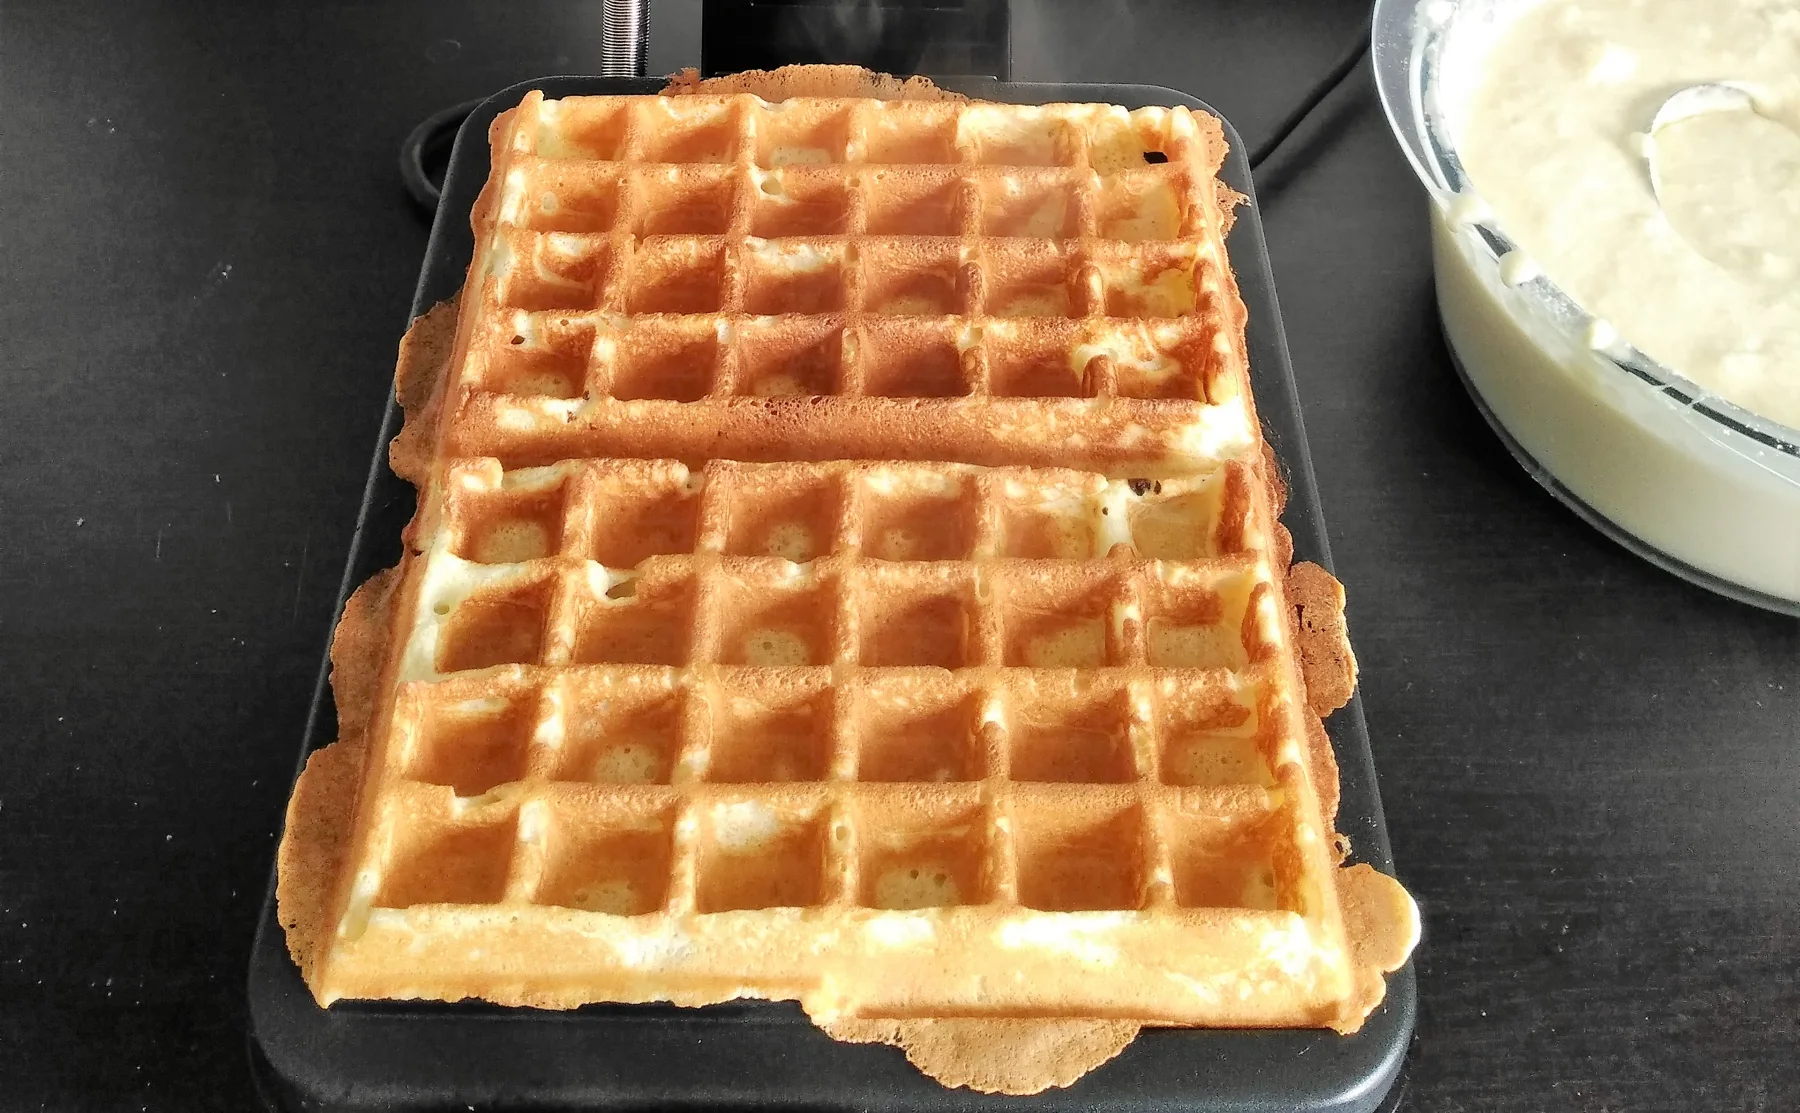 Enjoy delicious waffles in Vieux Lille - 457636